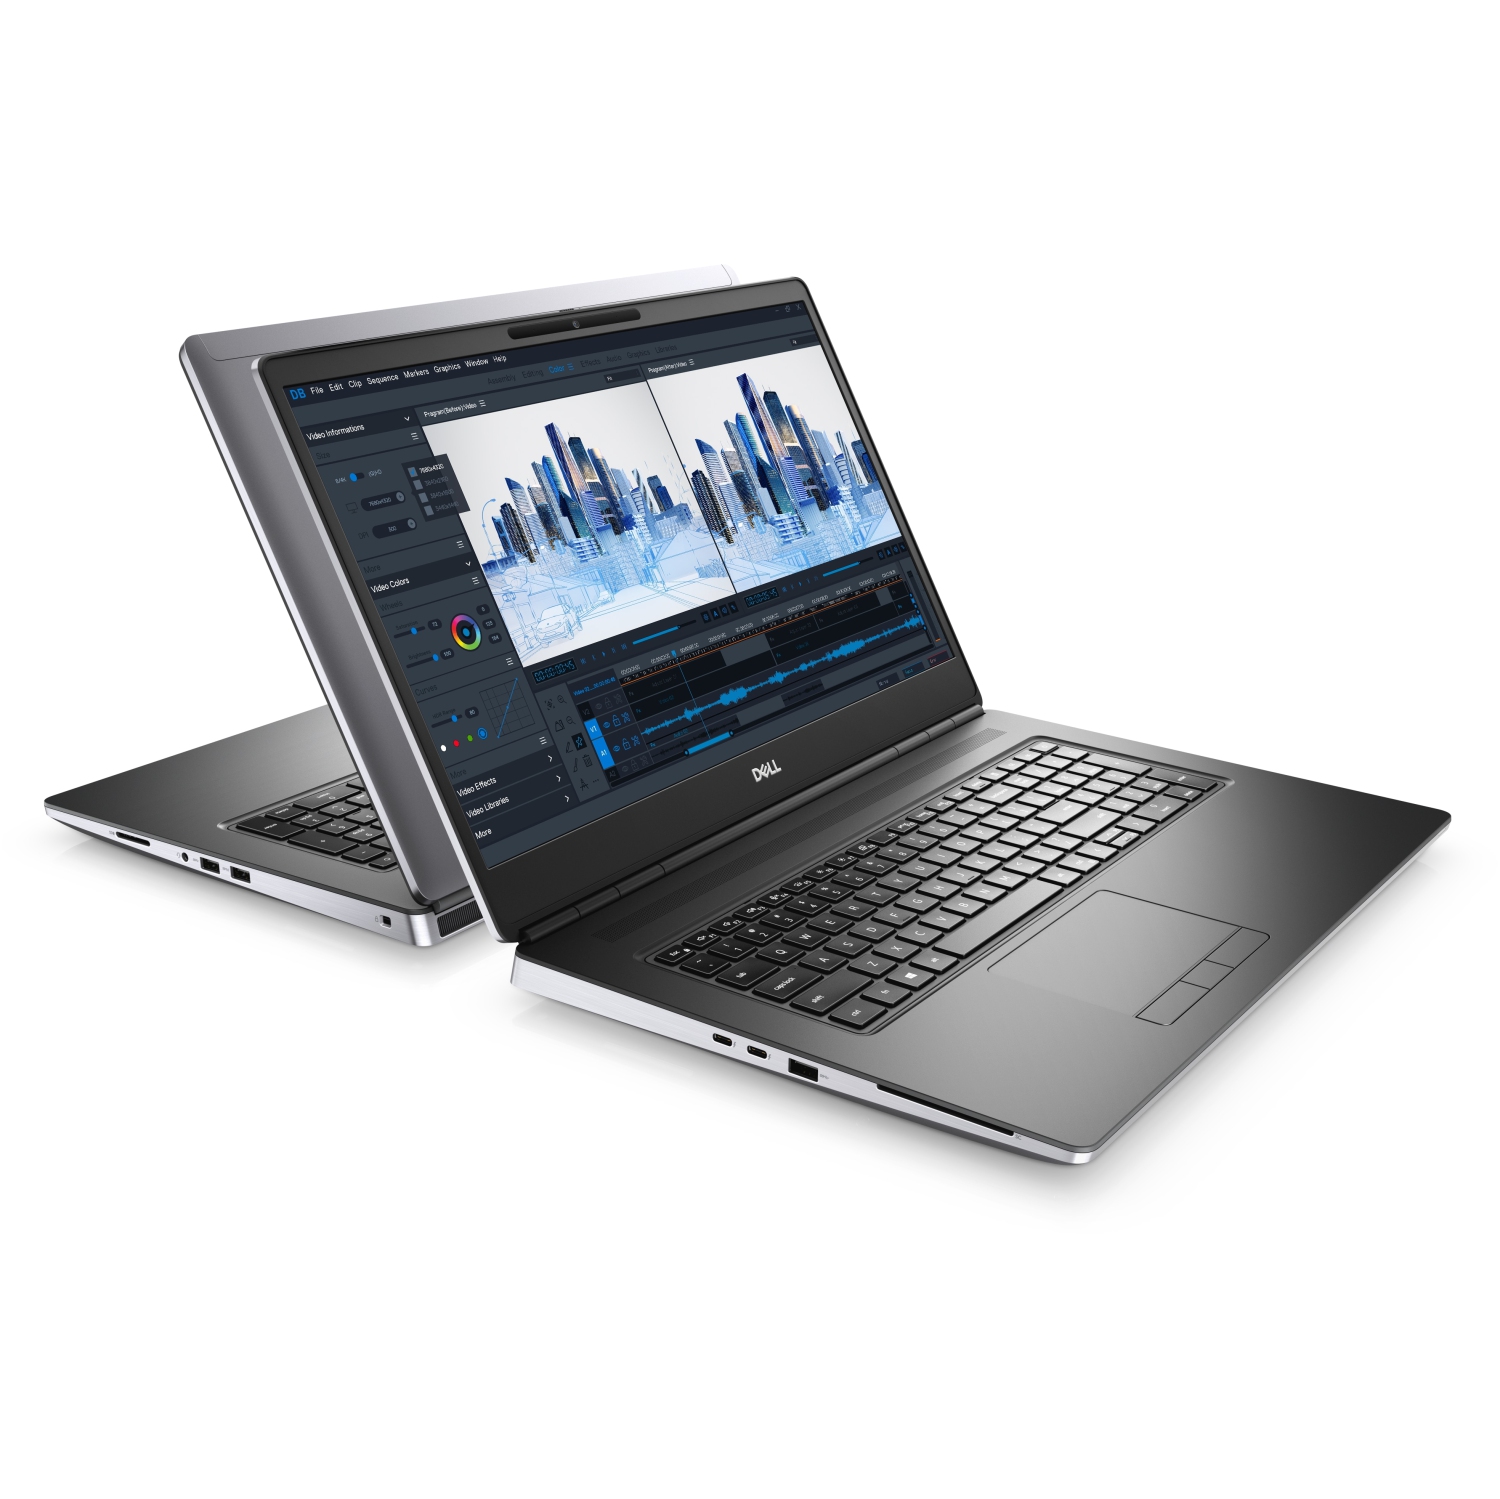 Refurbished (Excellent) - Dell Precision 7000 7760 Workstation Laptop (2021), 17.3" 4K, Core i9, 1TB SSD, 64GB RAM, RTX A5000, 8 Cores @ 5 GHz, 11th Gen CPU Certified